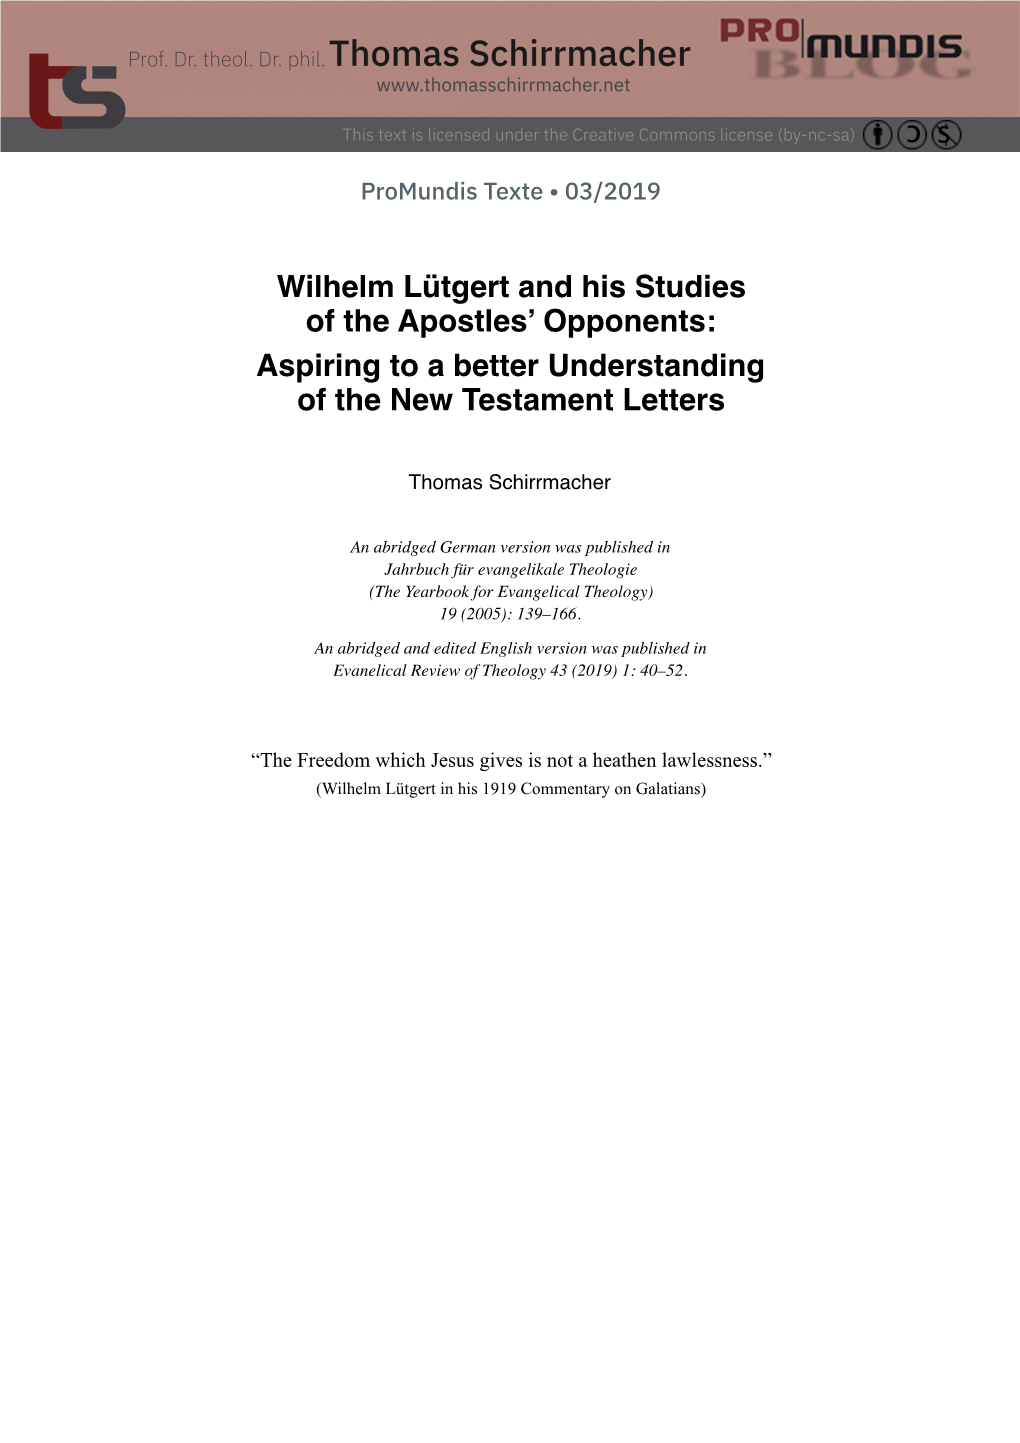 Wilhelm Lütgert and His Studies of the Apostles' Opponents